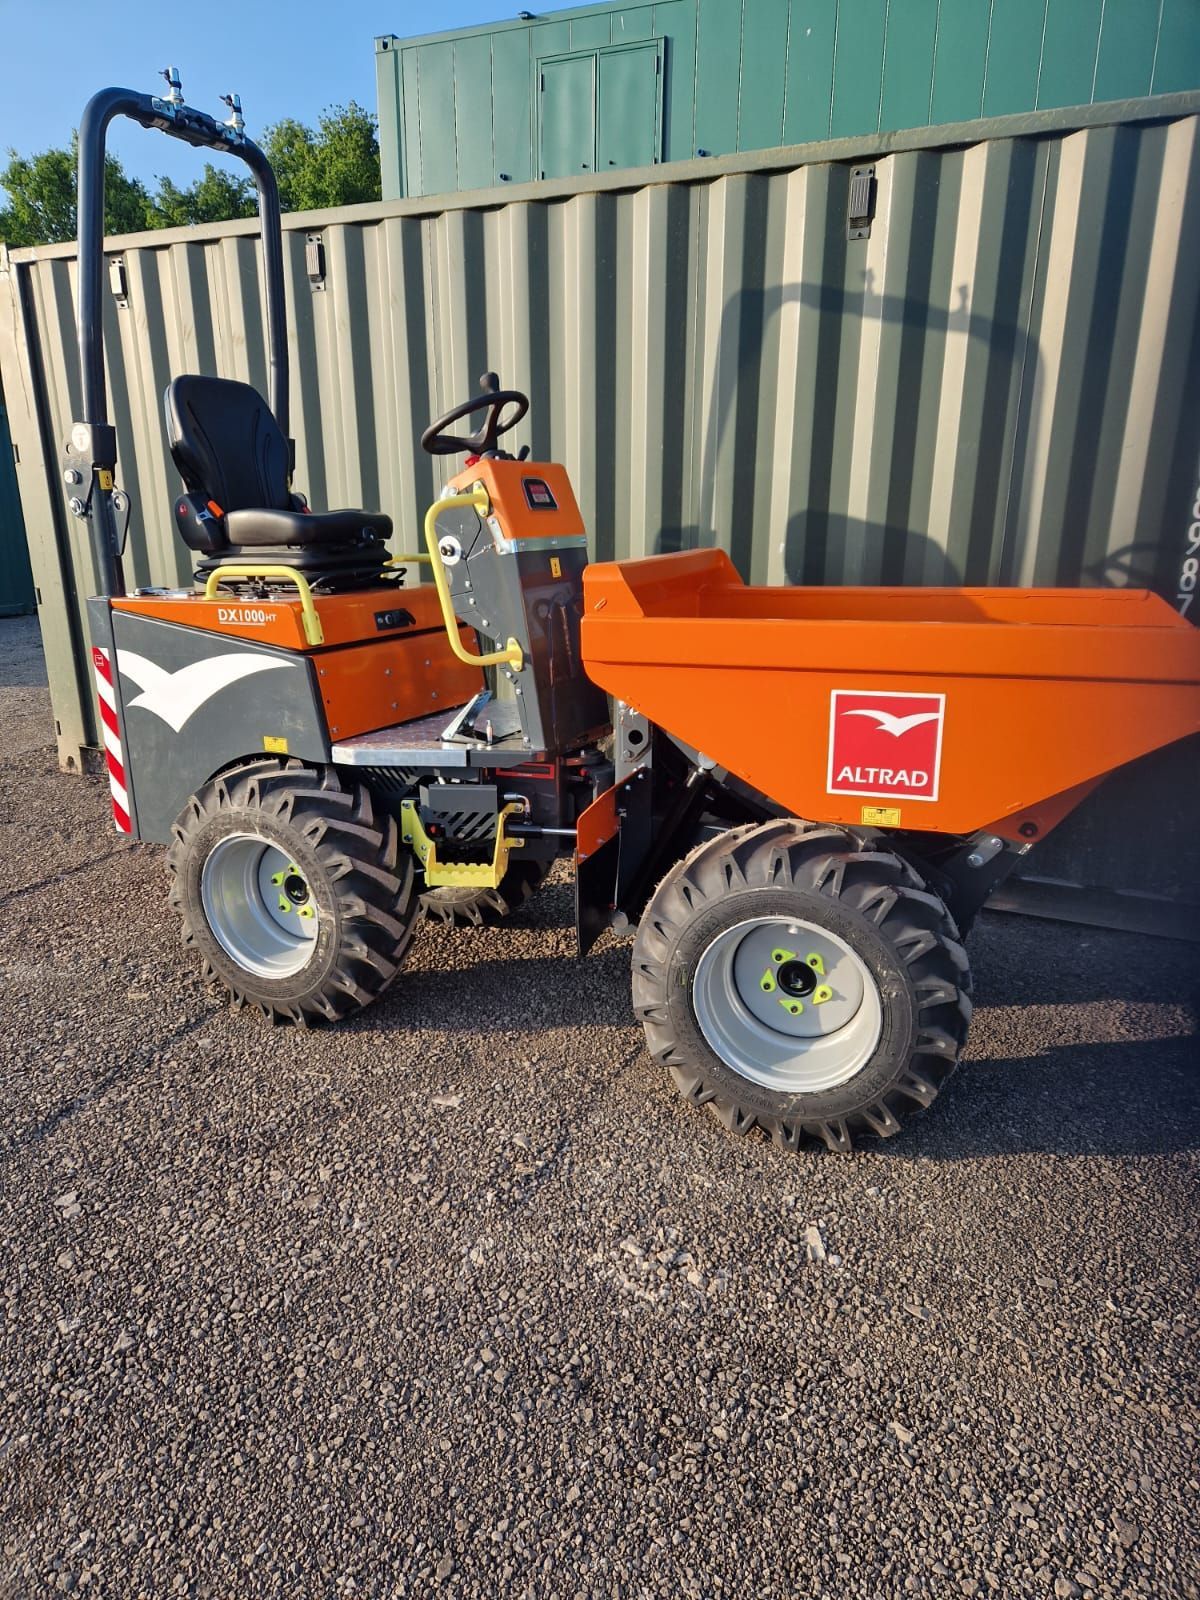 1T Dumper To Hire In Lincolnshire